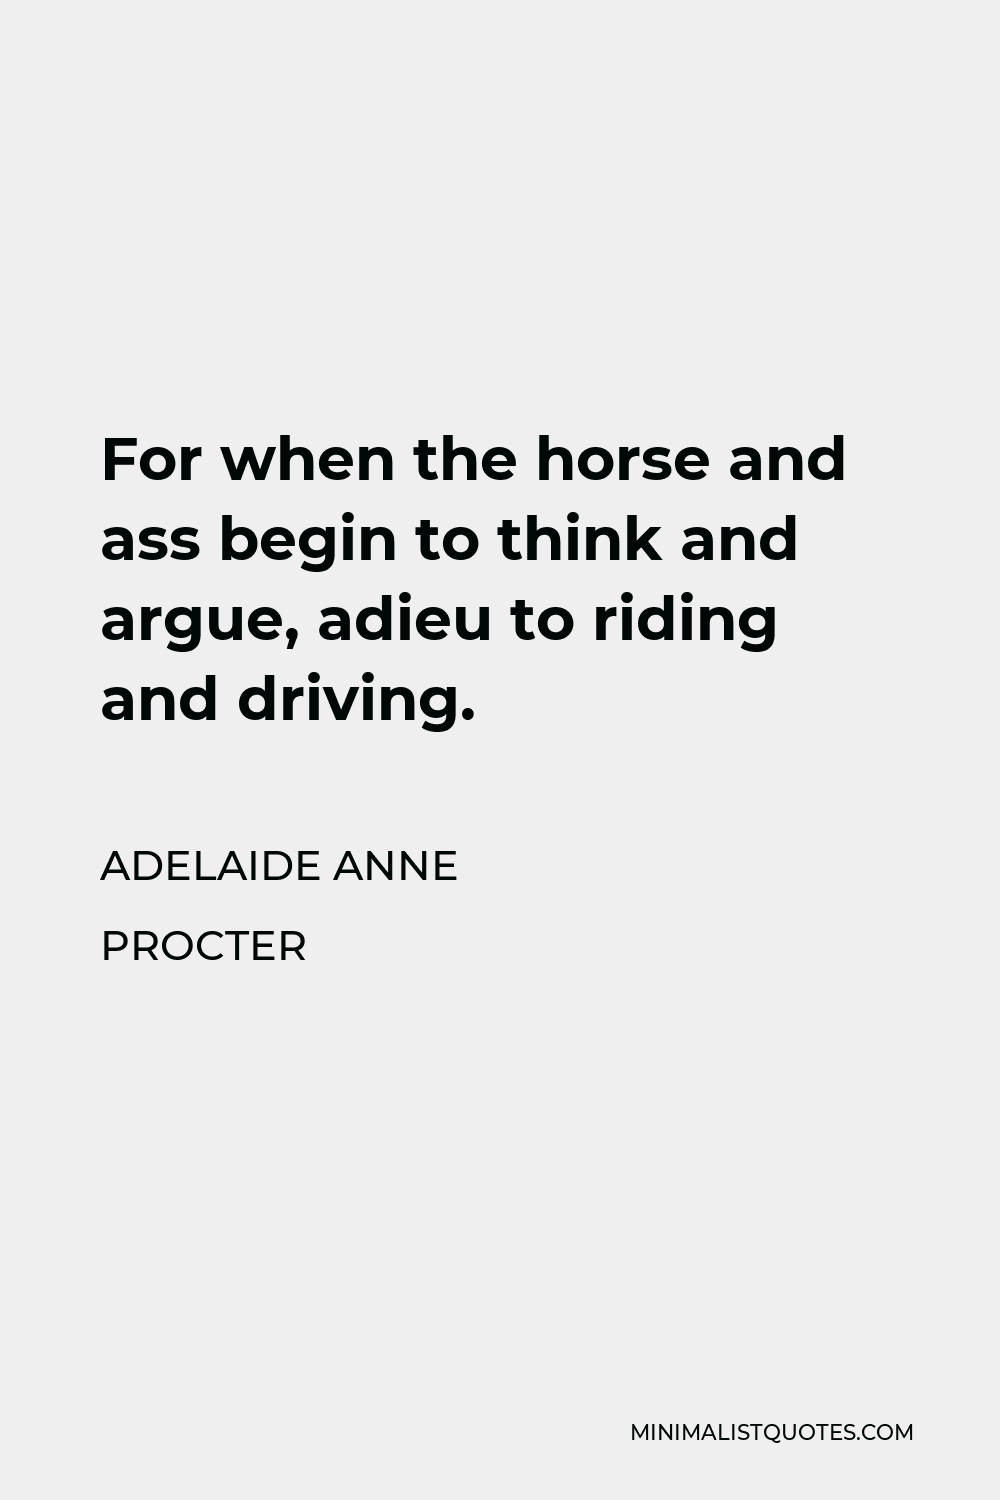 Adelaide Anne Procter Quote - For when the horse and ass begin to think and argue, adieu to riding and driving.